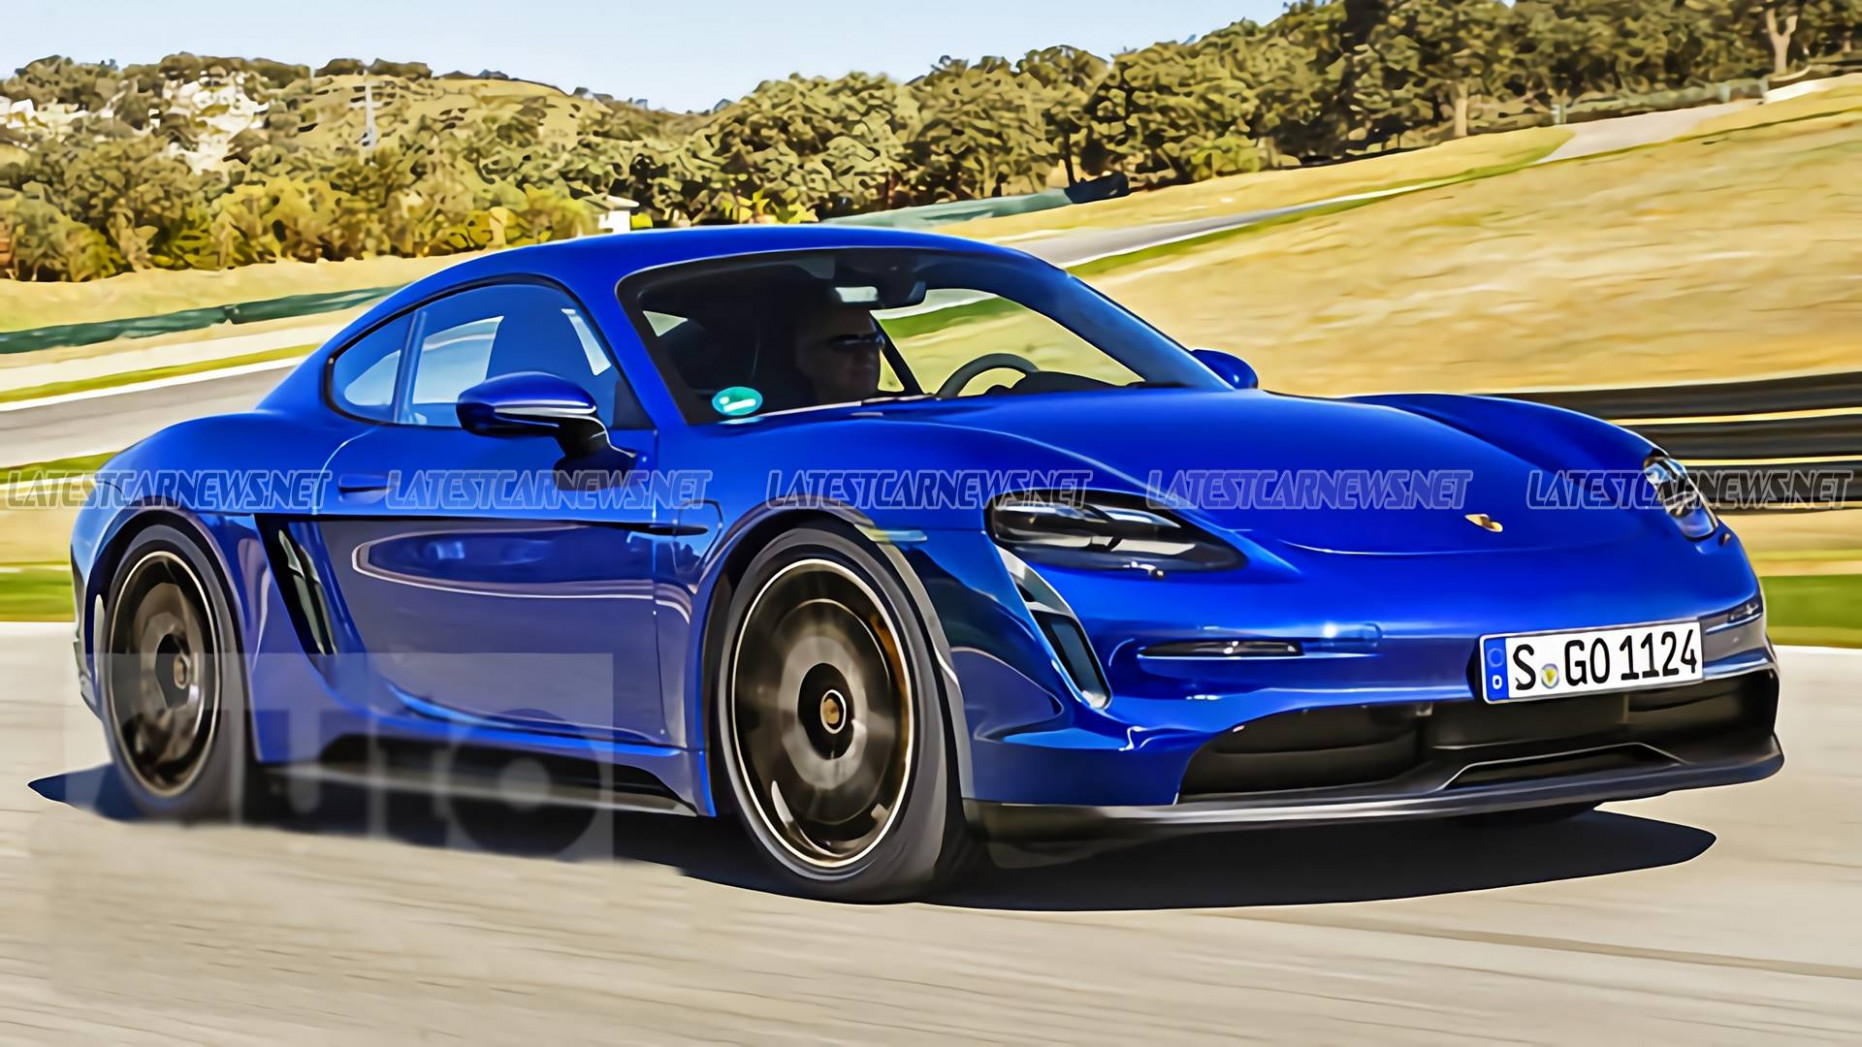 Porsche Cayman E will be on the road in 12 - Latest Car News